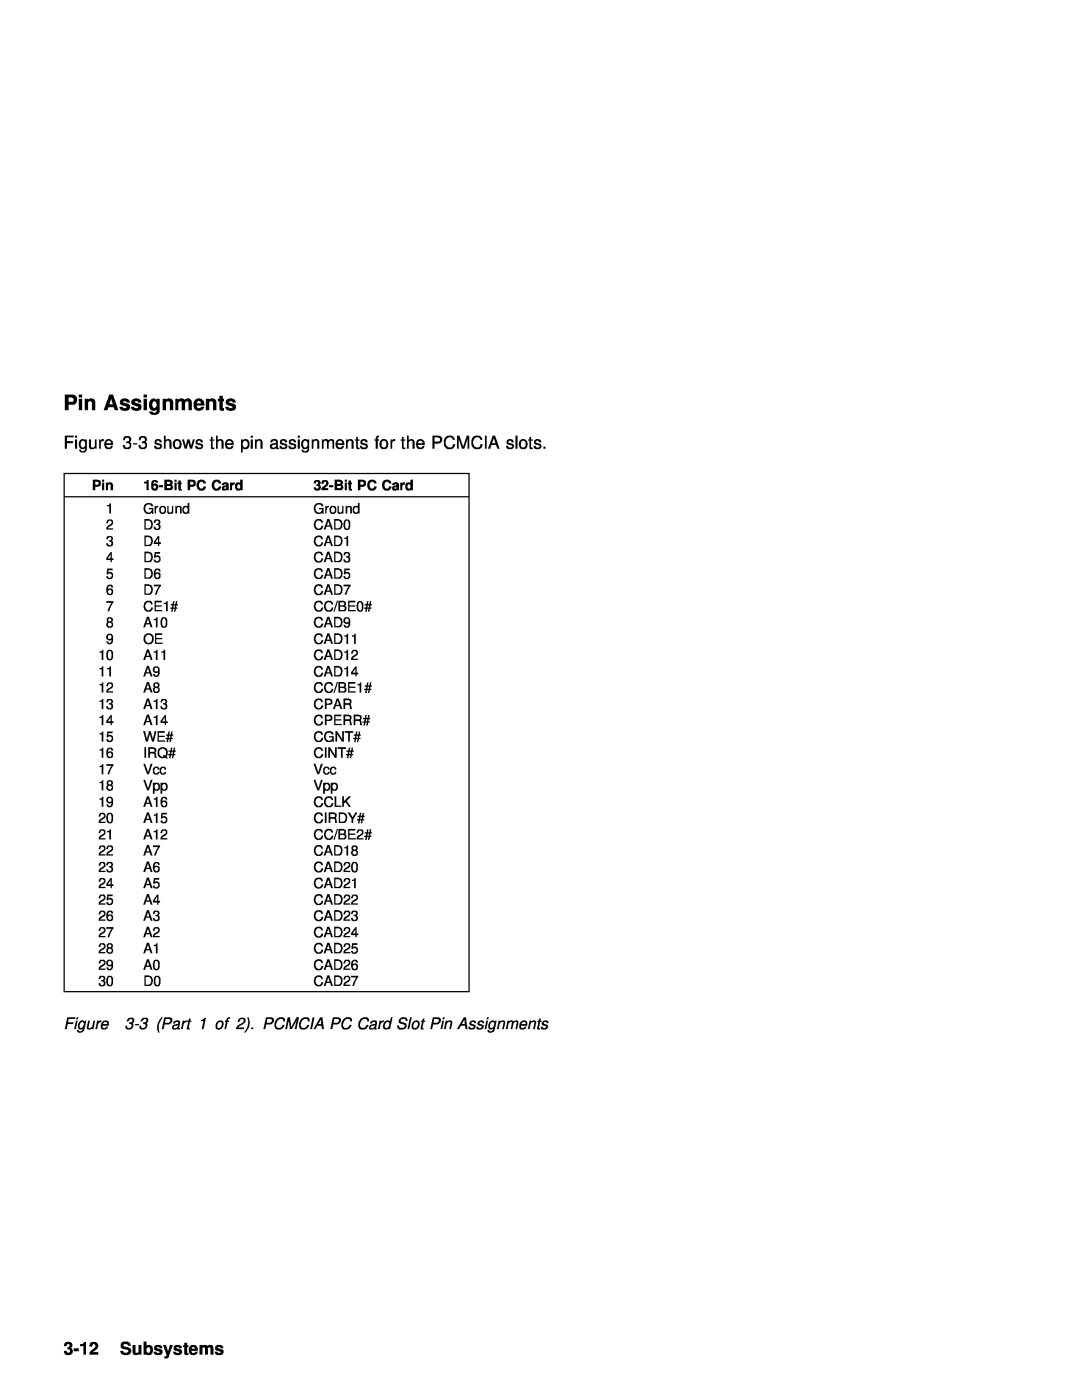 IBM 770 manual Pin Assignments, Subsystems 